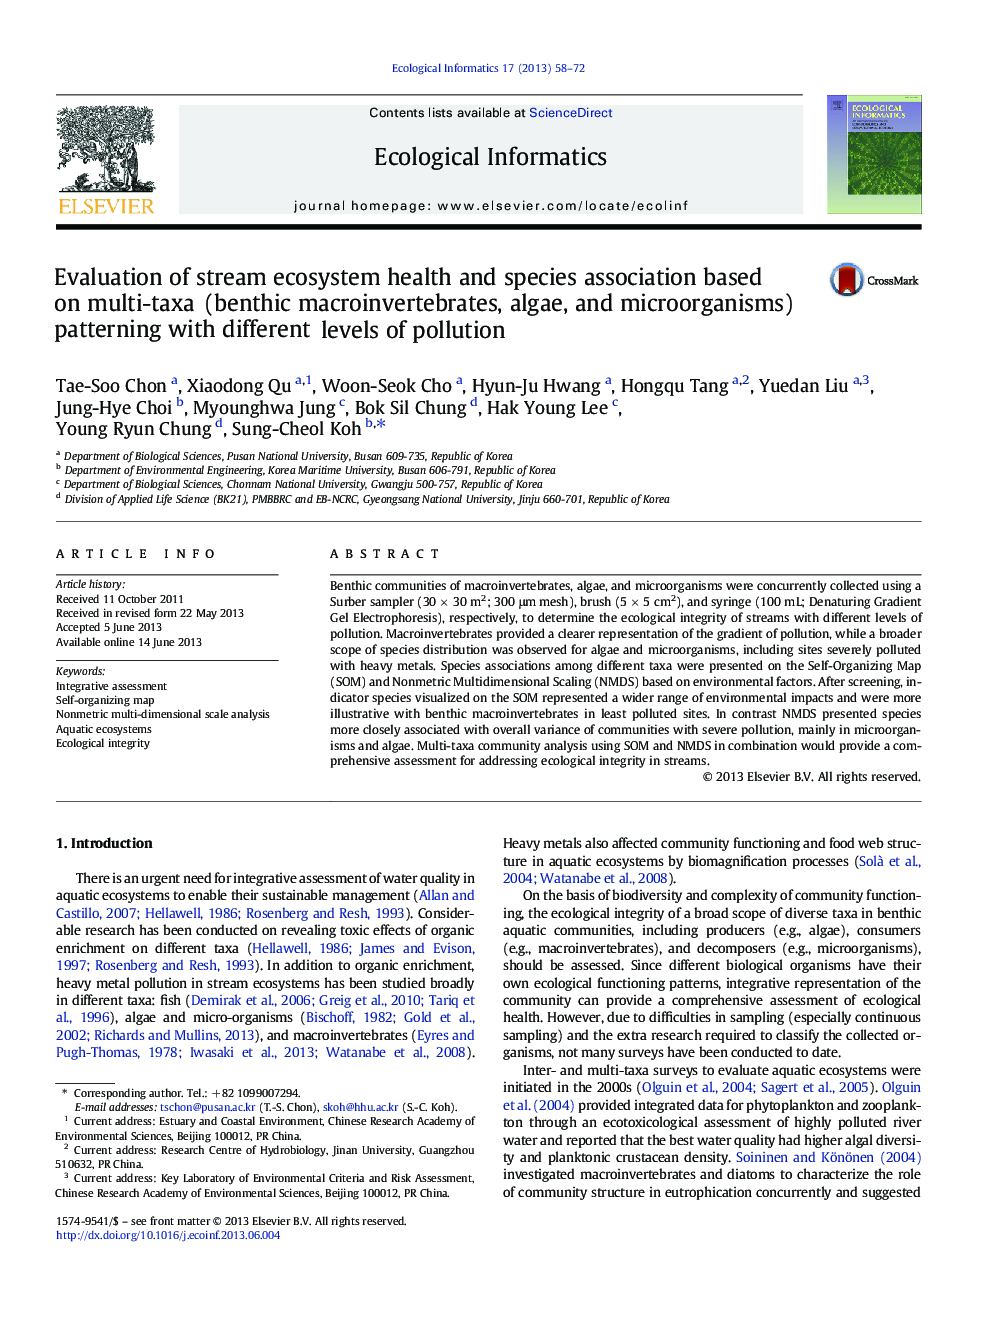 Evaluation of stream ecosystem health and species association based on multi-taxa (benthic macroinvertebrates, algae, and microorganisms) patterning with different levels of pollution